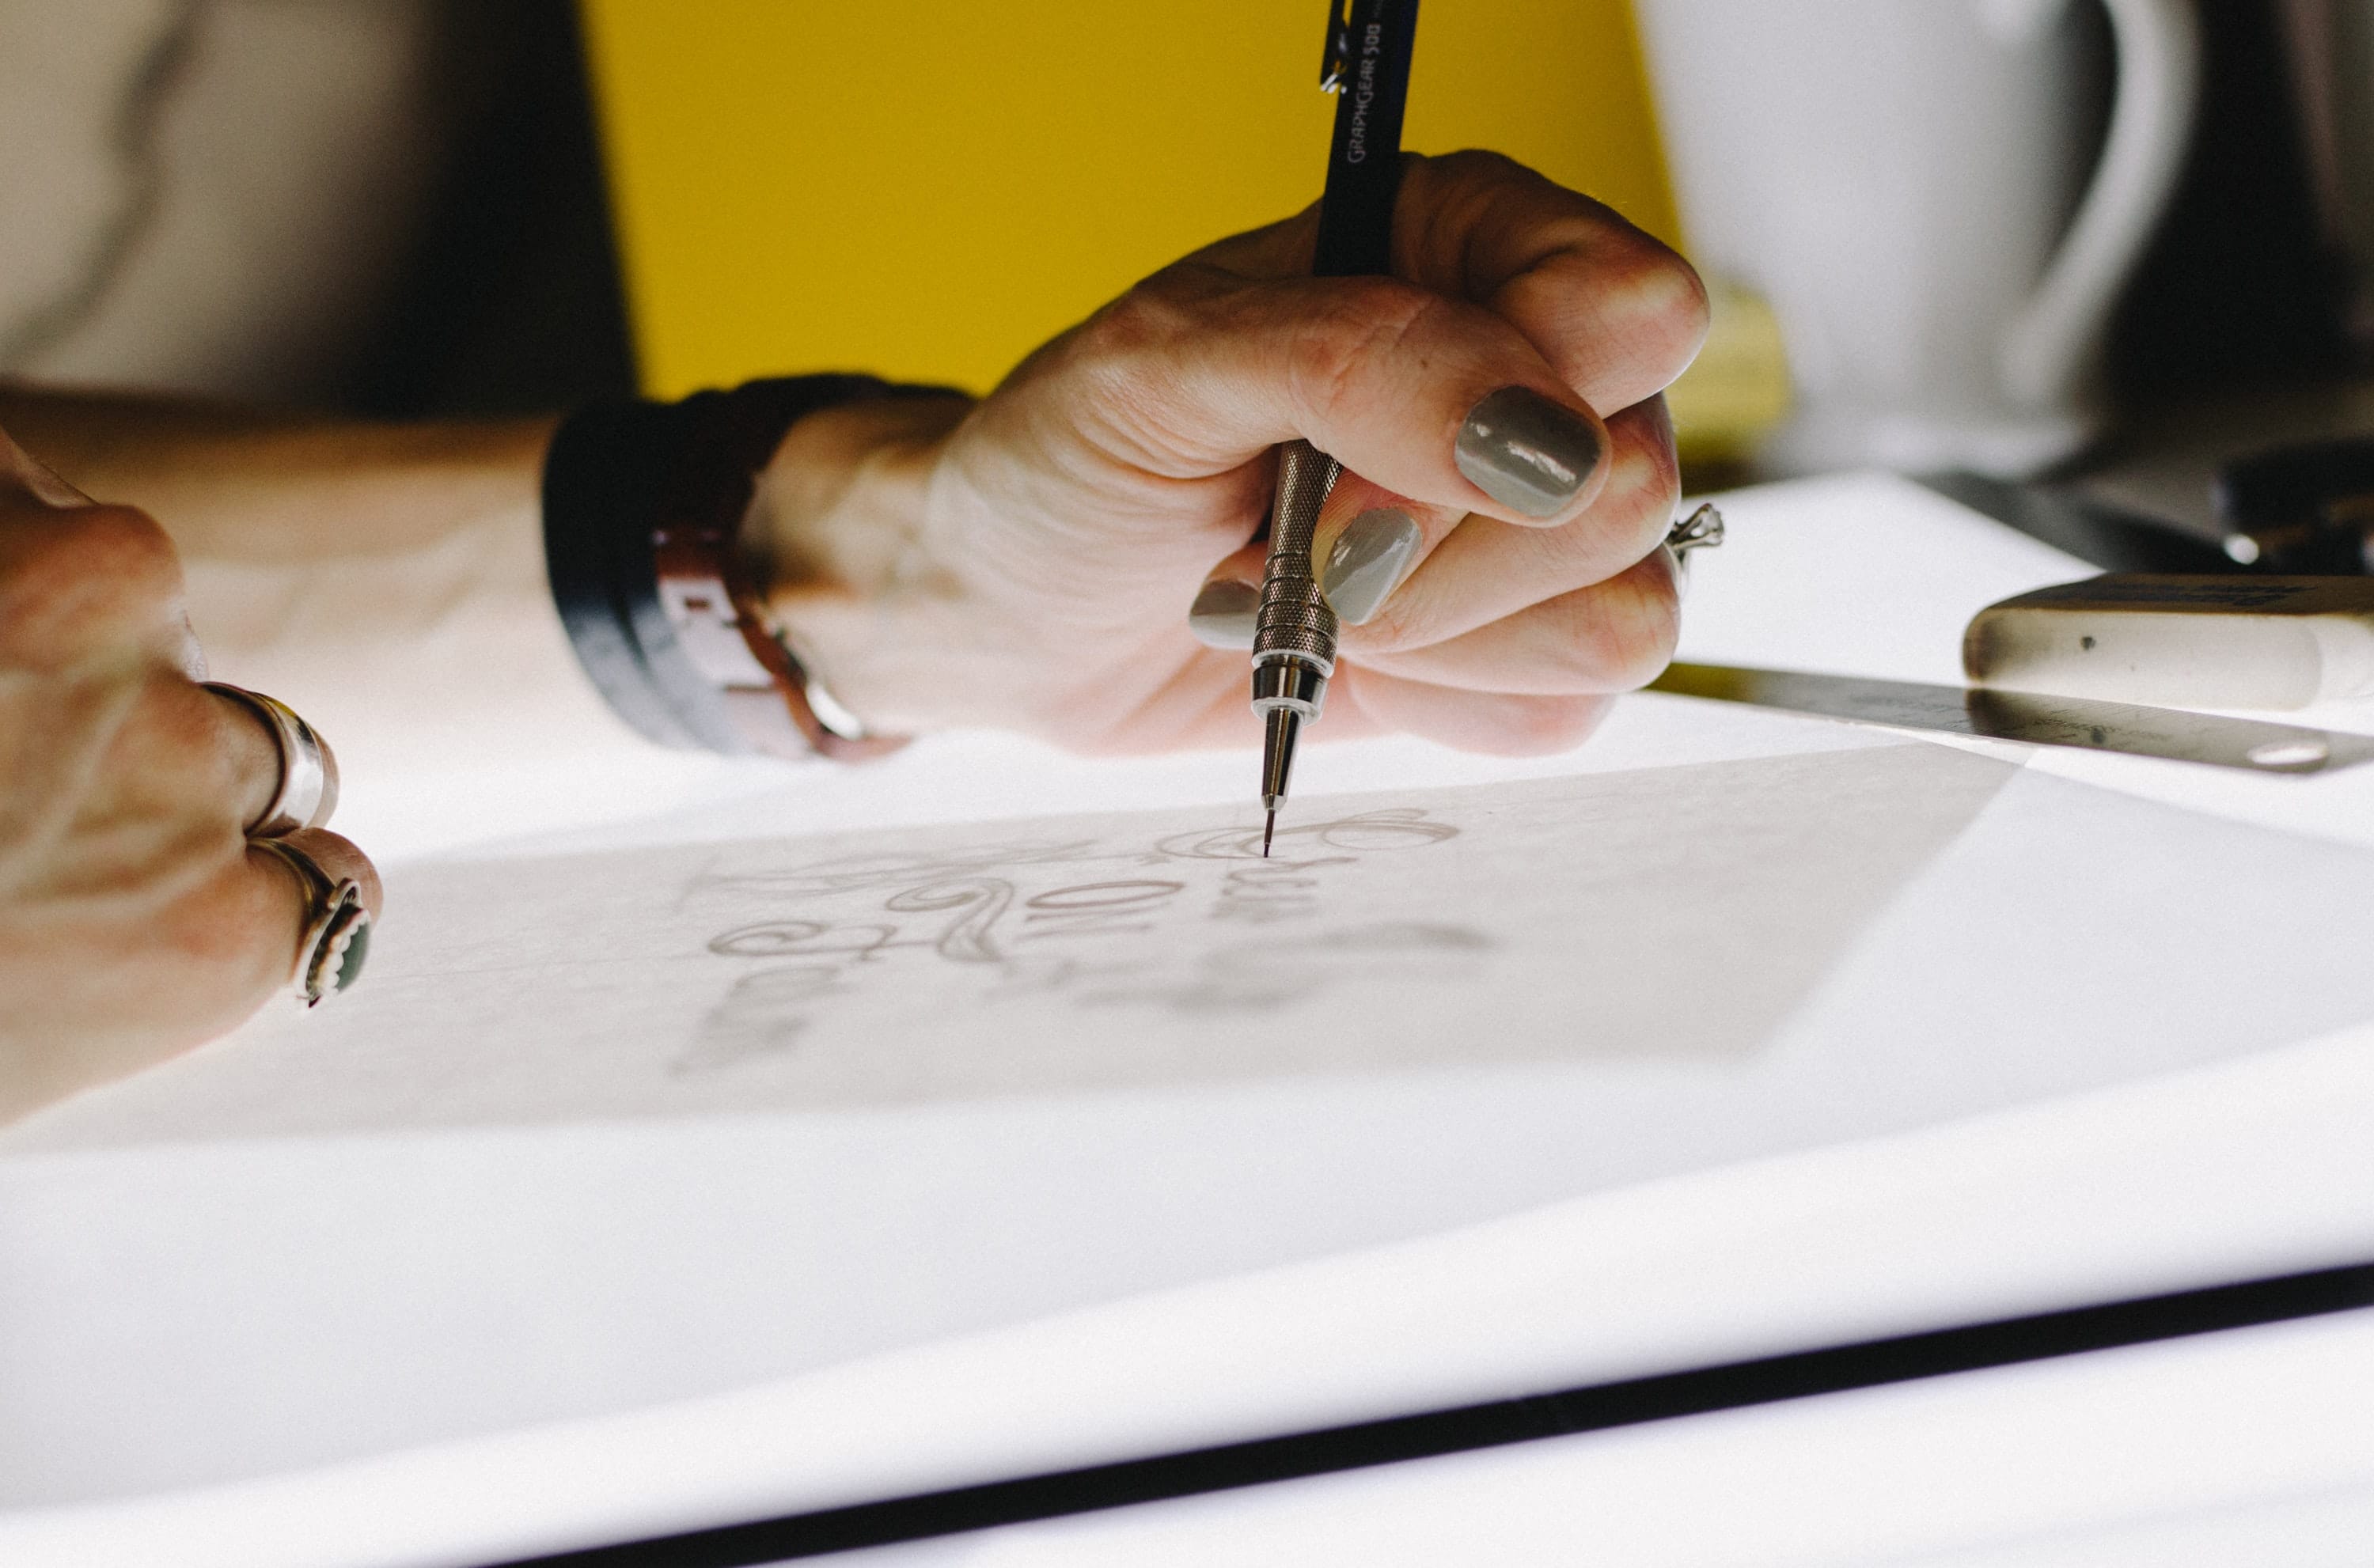 close-up shot of person drawing with graphics pencil on a tracing table